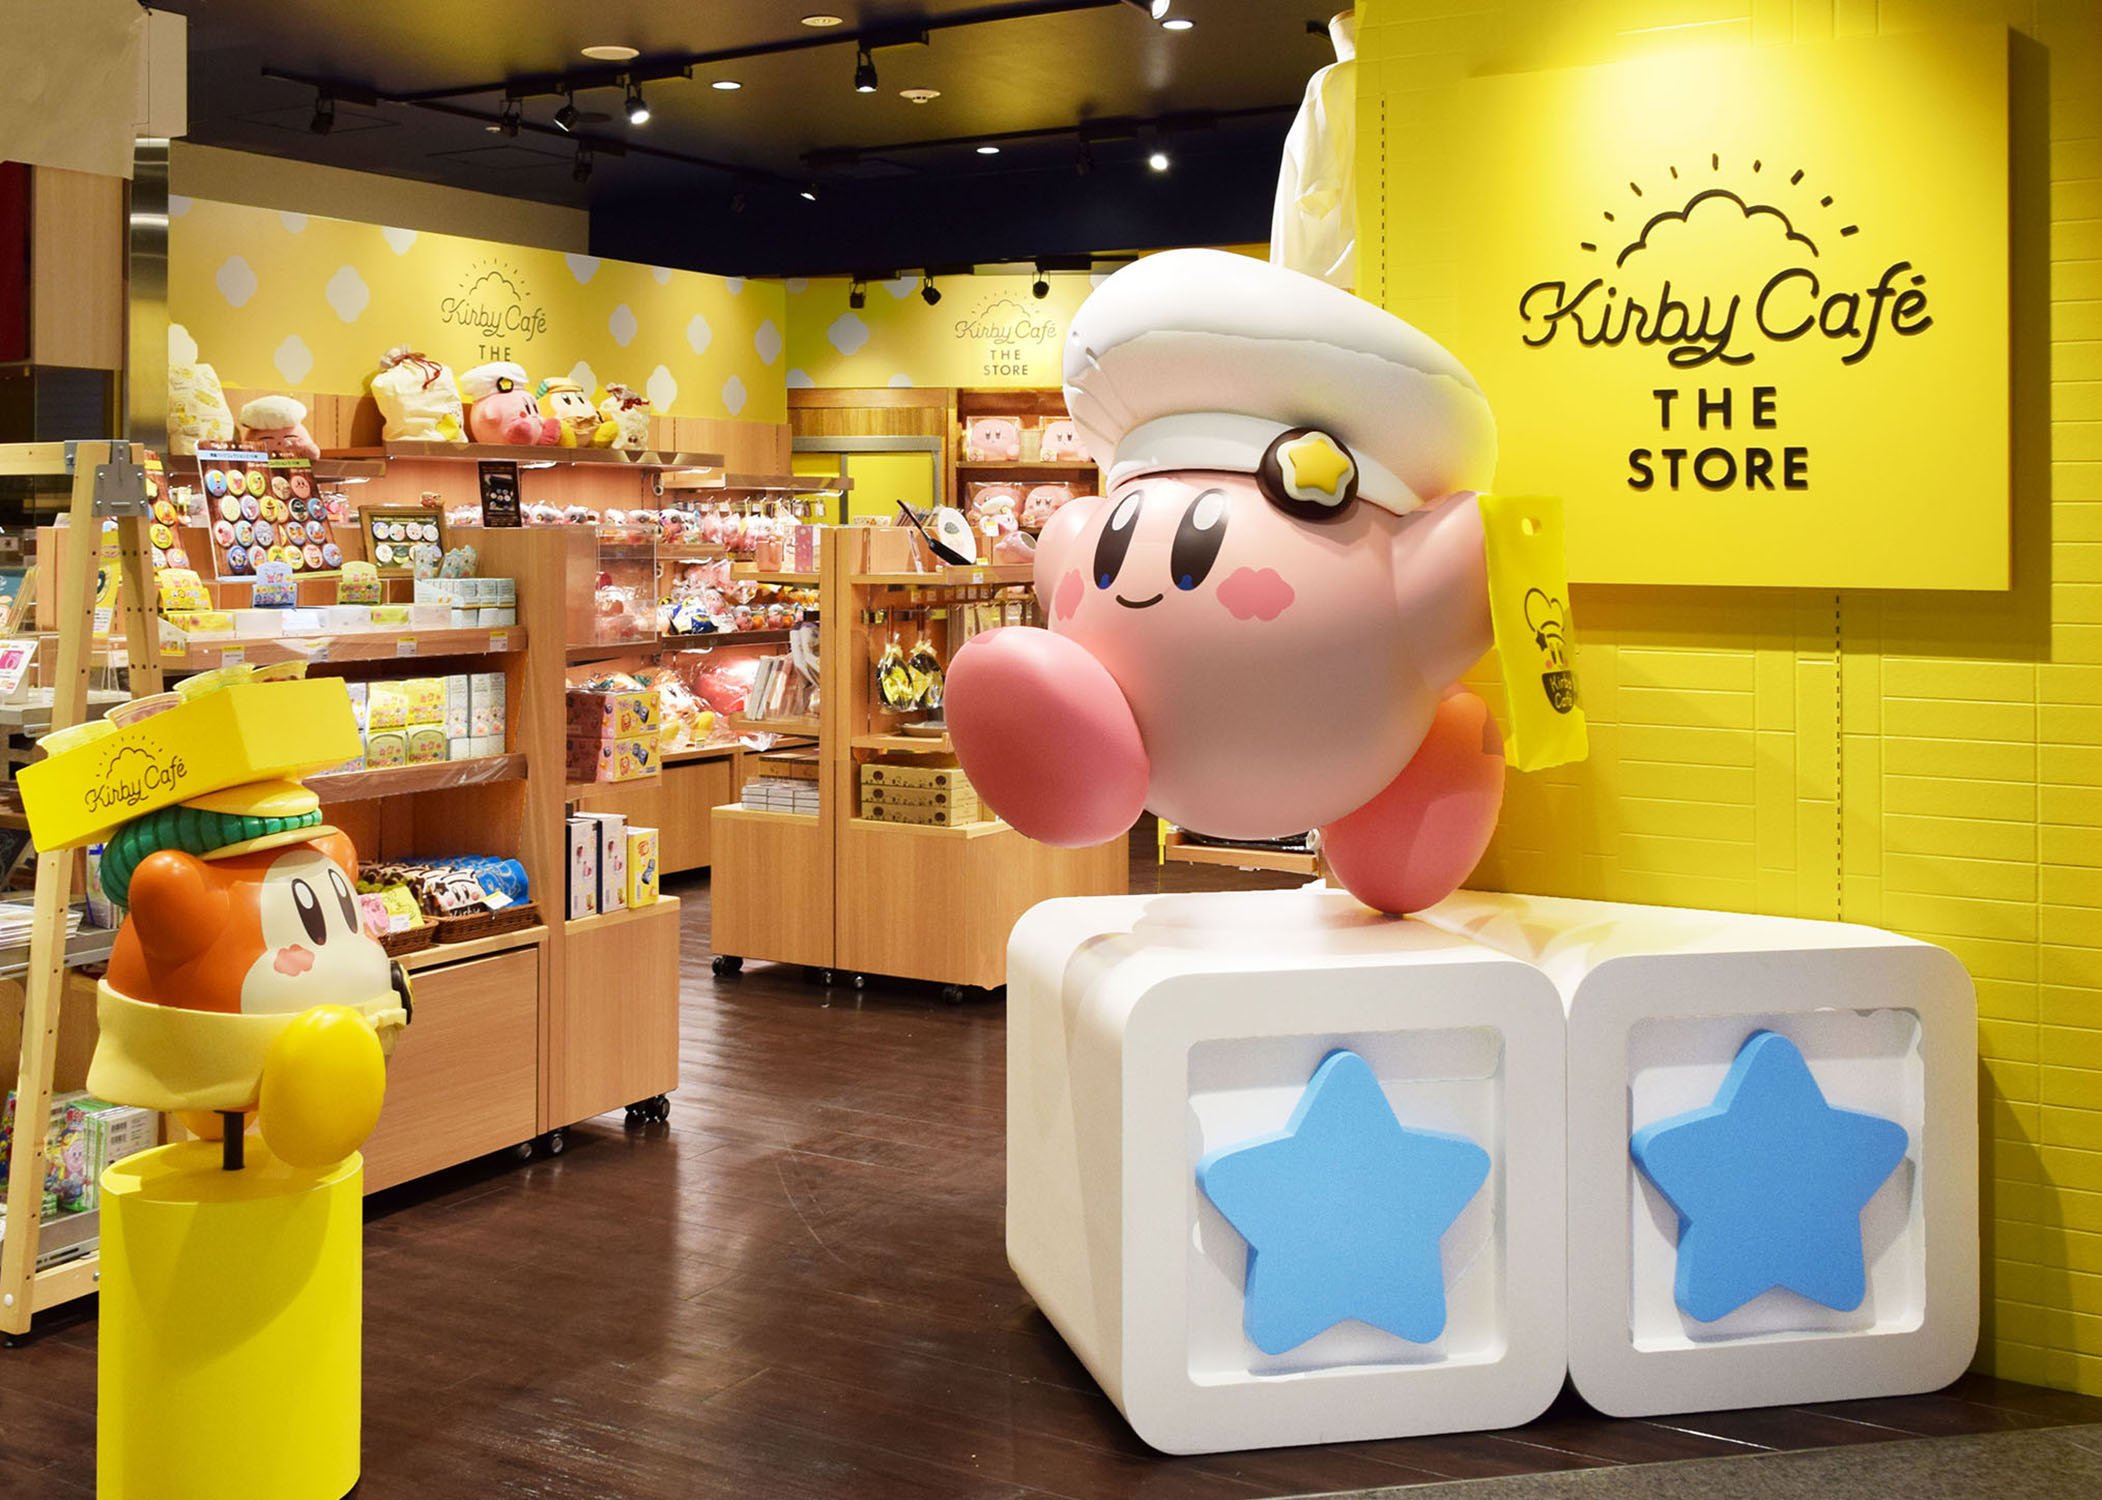 Kirby Café THE STORE (カービィカフェ ザ・ストア)